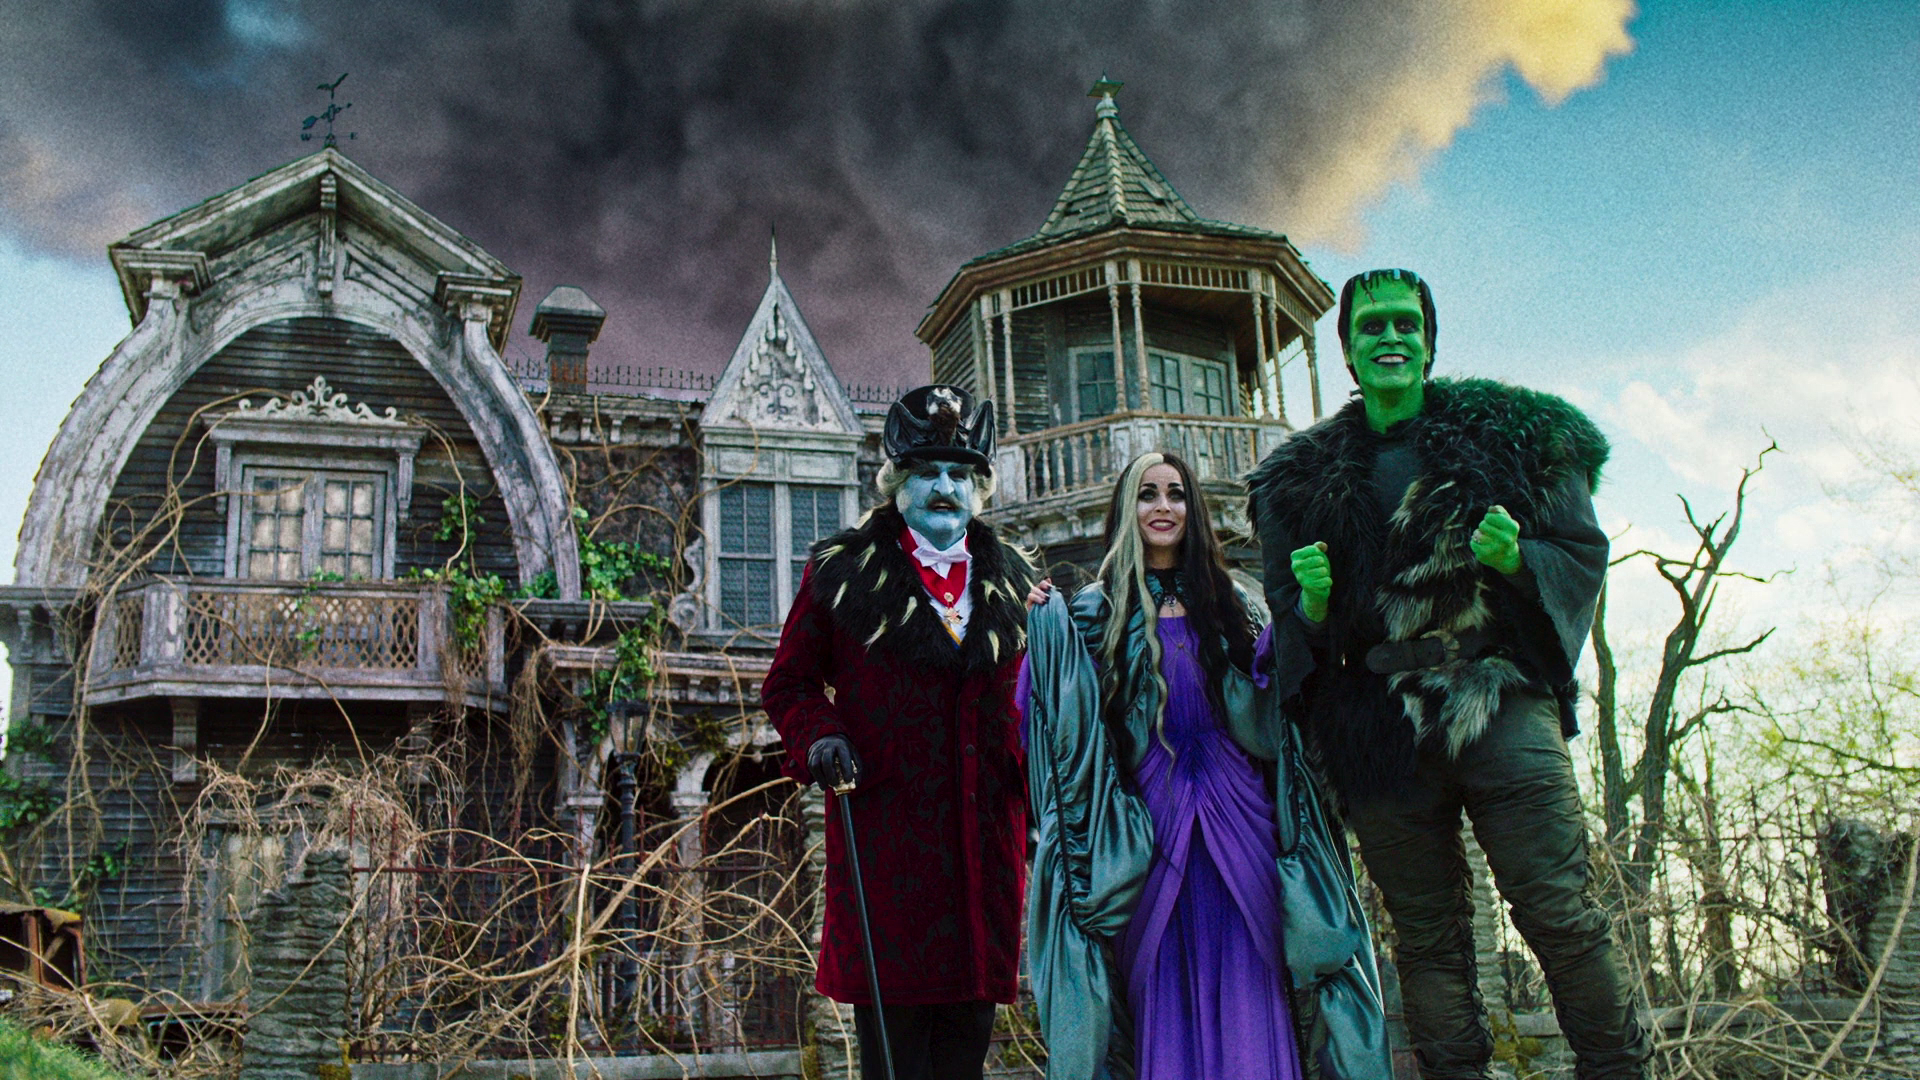 Rob Zombie's 'The Munsters' Sets Digital and Blu-ray Premiere Date